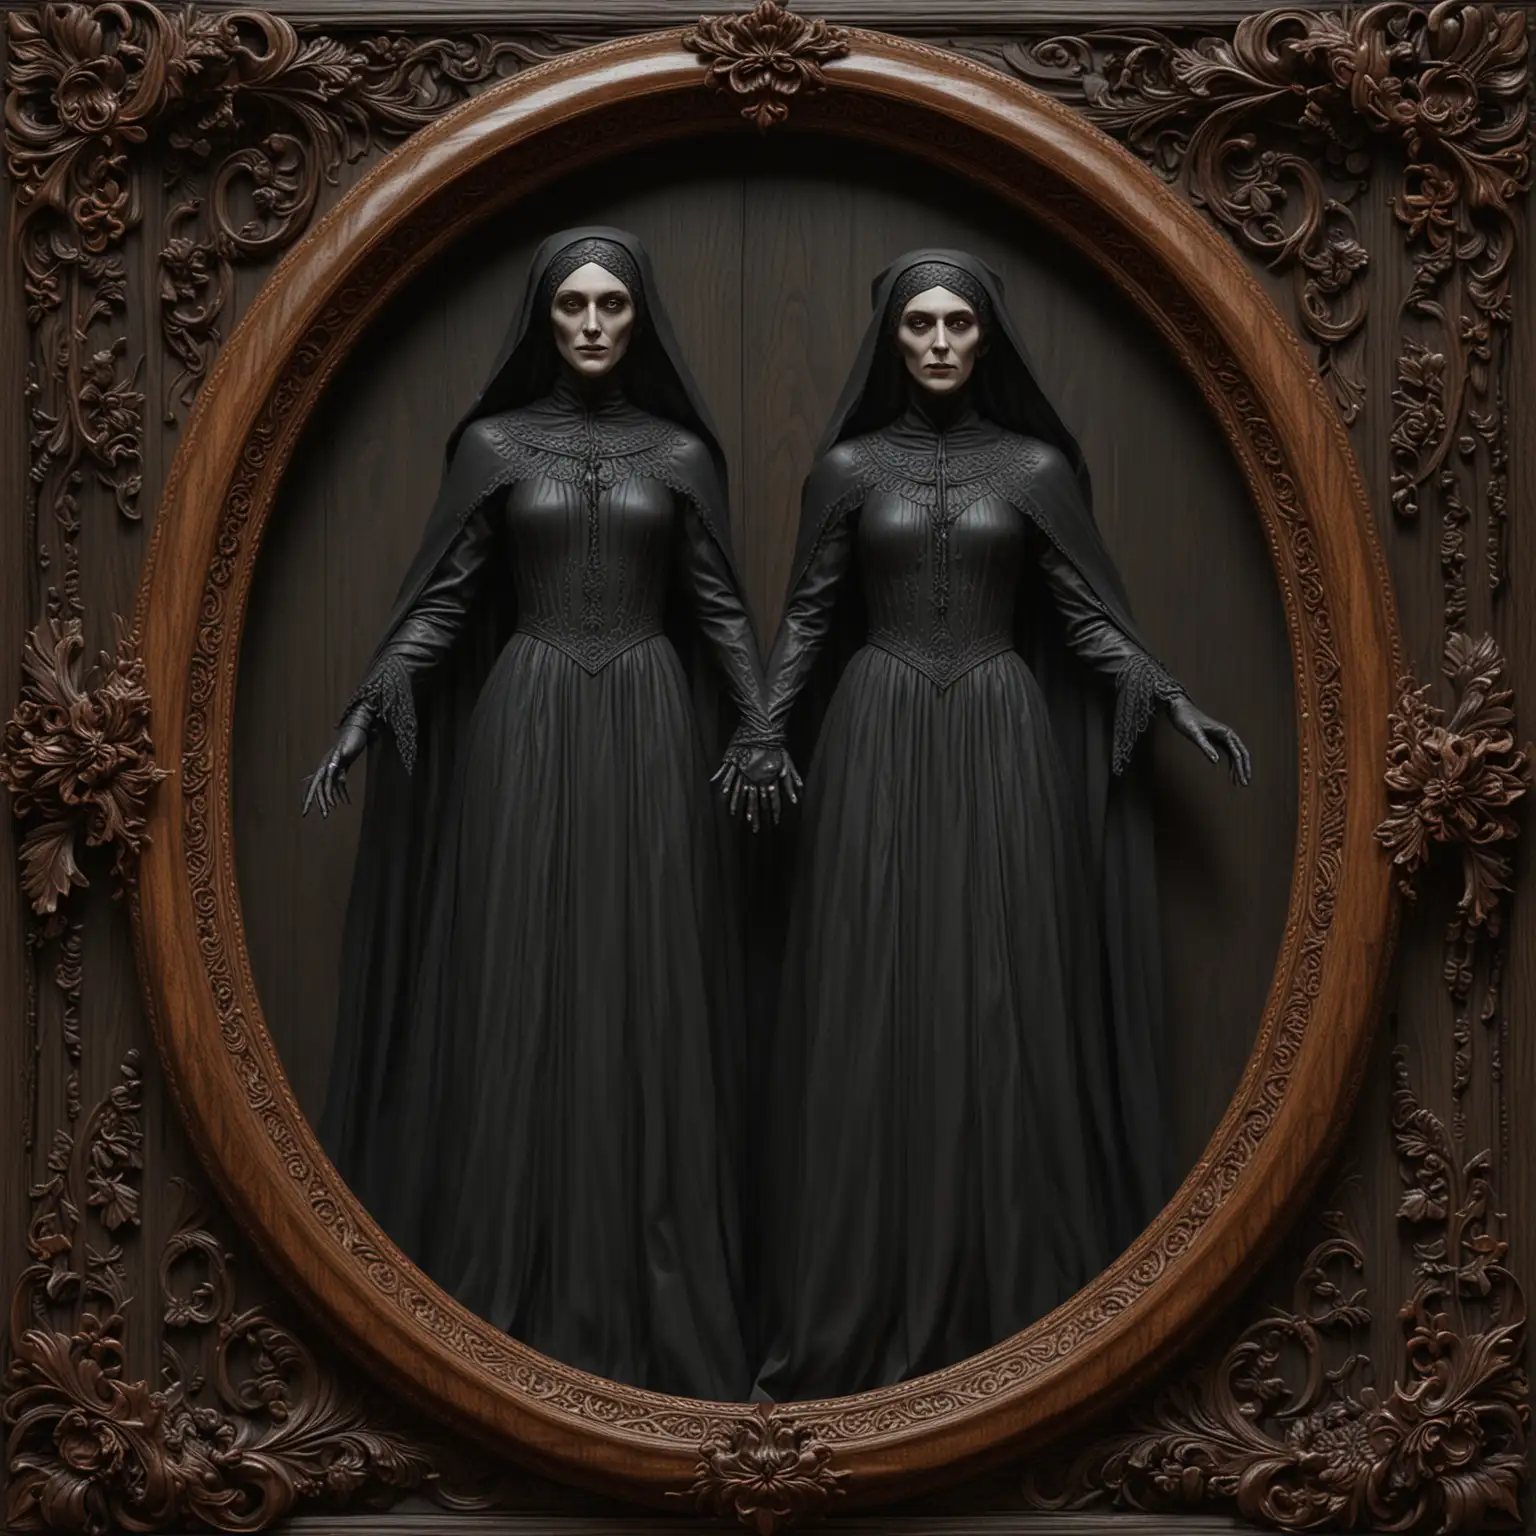 3D SEAMLESS AND TILEABLE DARK LACQUERED WOOD WITH A FINELY CARVED FRAME SURROUND FEATURING   FINELY  CARVED WOODEN bRIDE OF Nosferatu 






